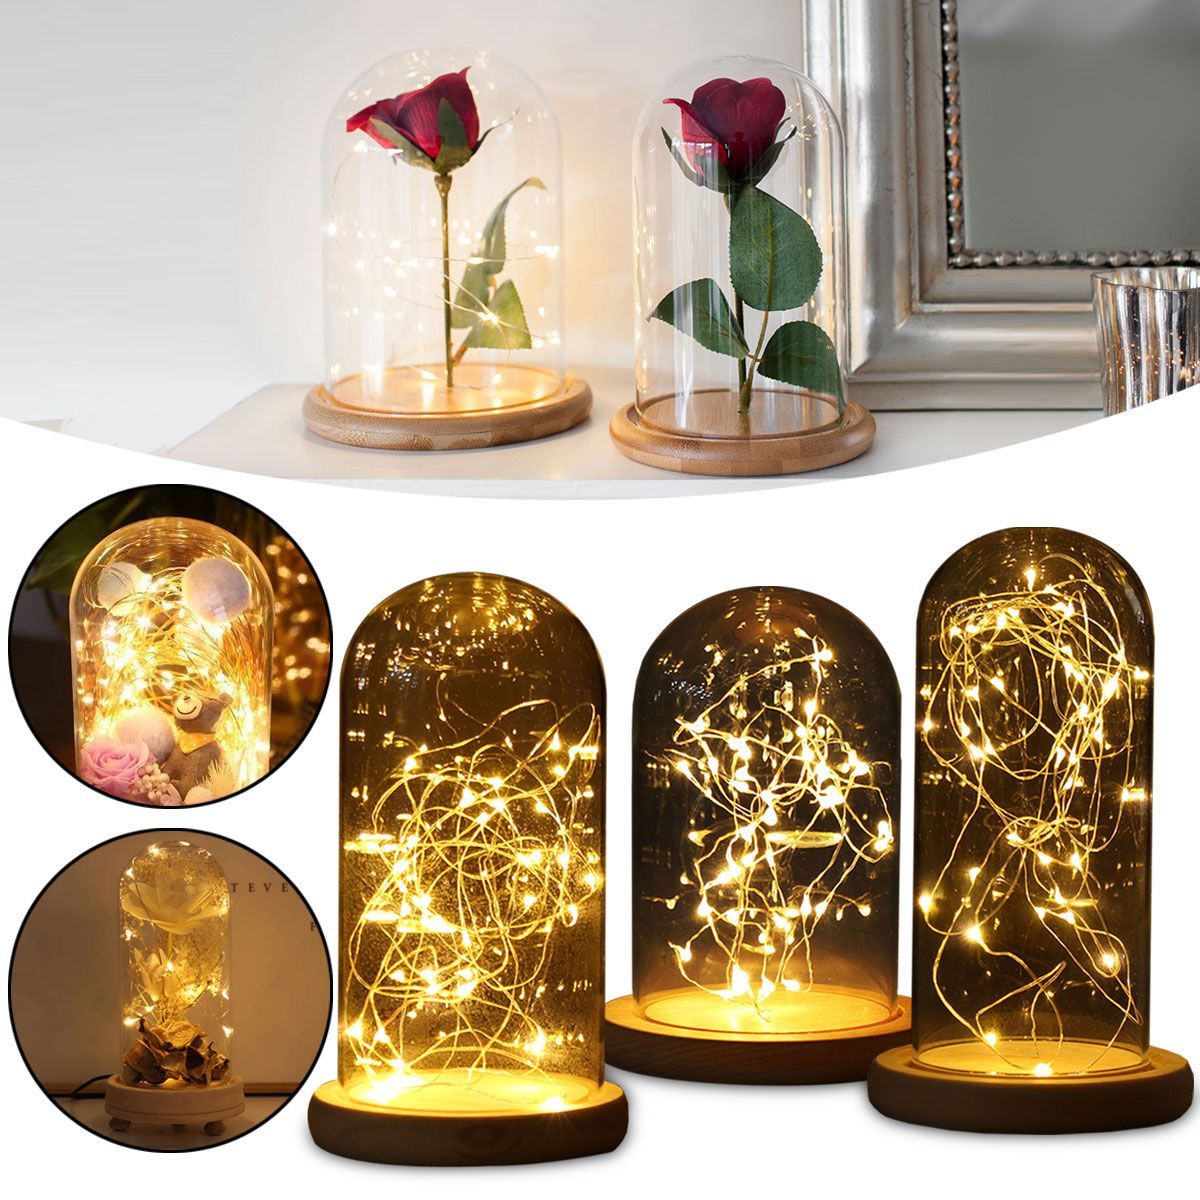 9x15cm-Glass-Dome-Bell-Jar-Cloche-Display-Wooden-Base-With-Fairy-LED-Light-Decorations-Christmas-Gif-1394851